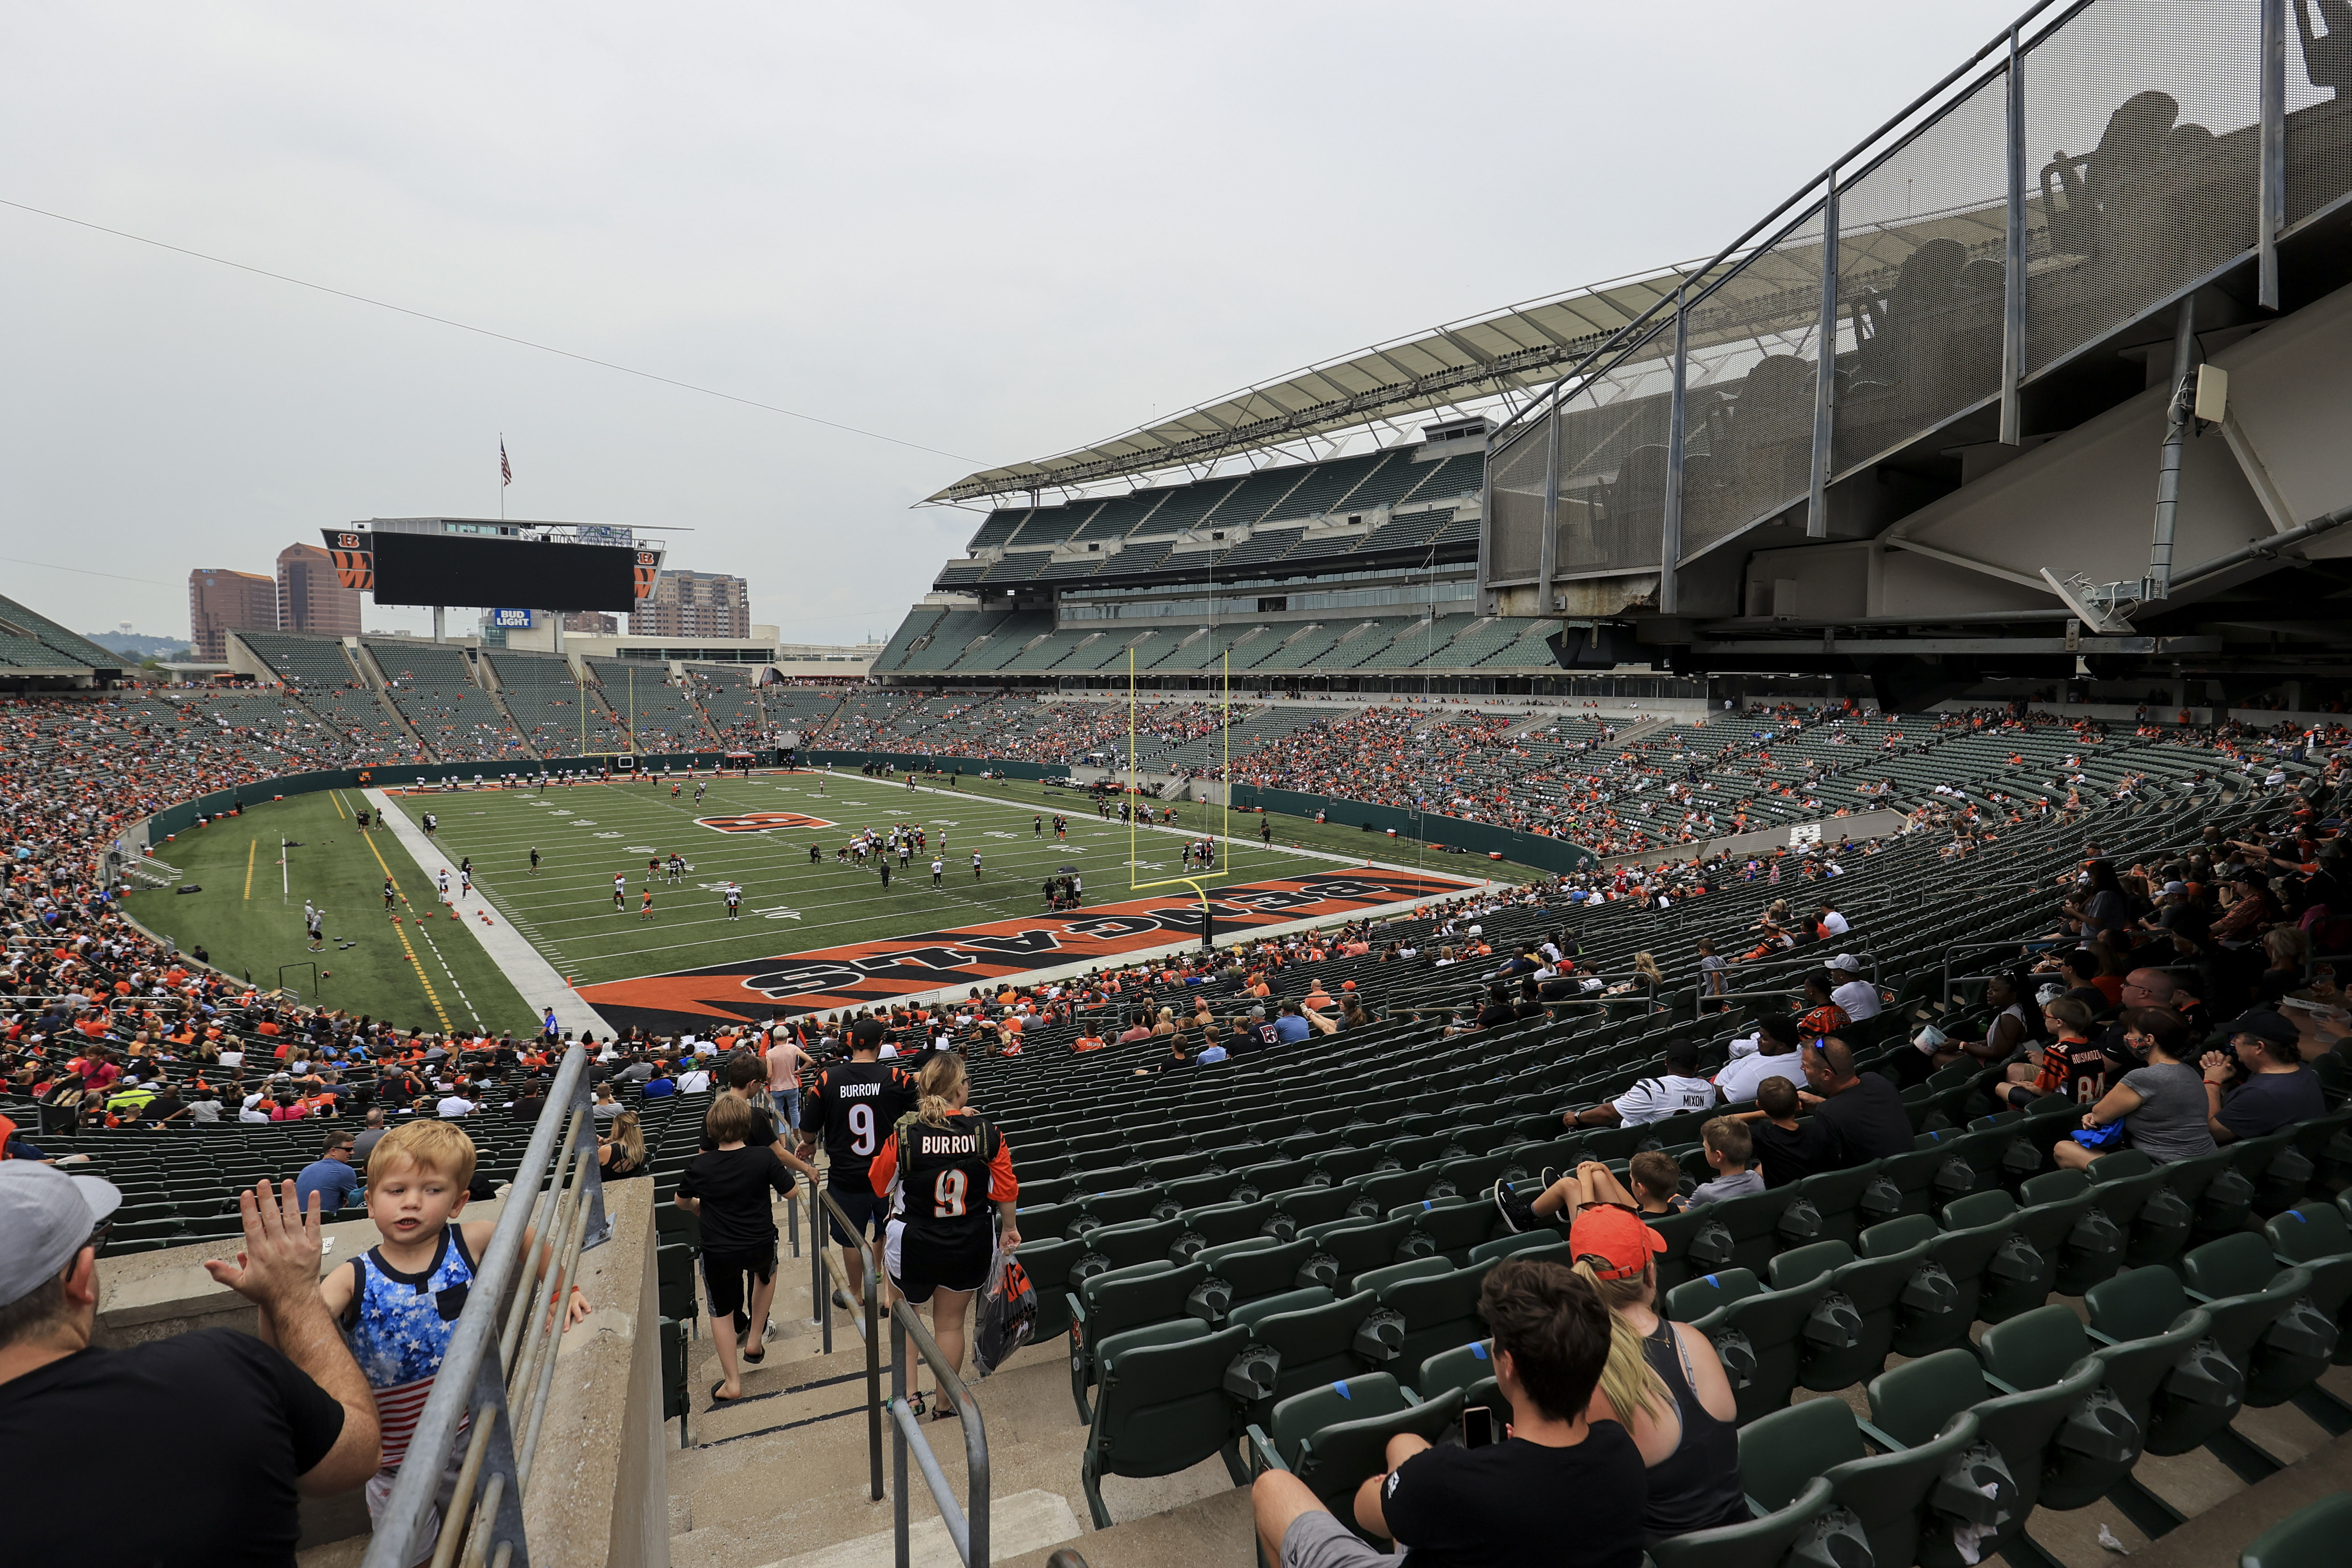 Bengals announce training camp schedule for fans to attend practices